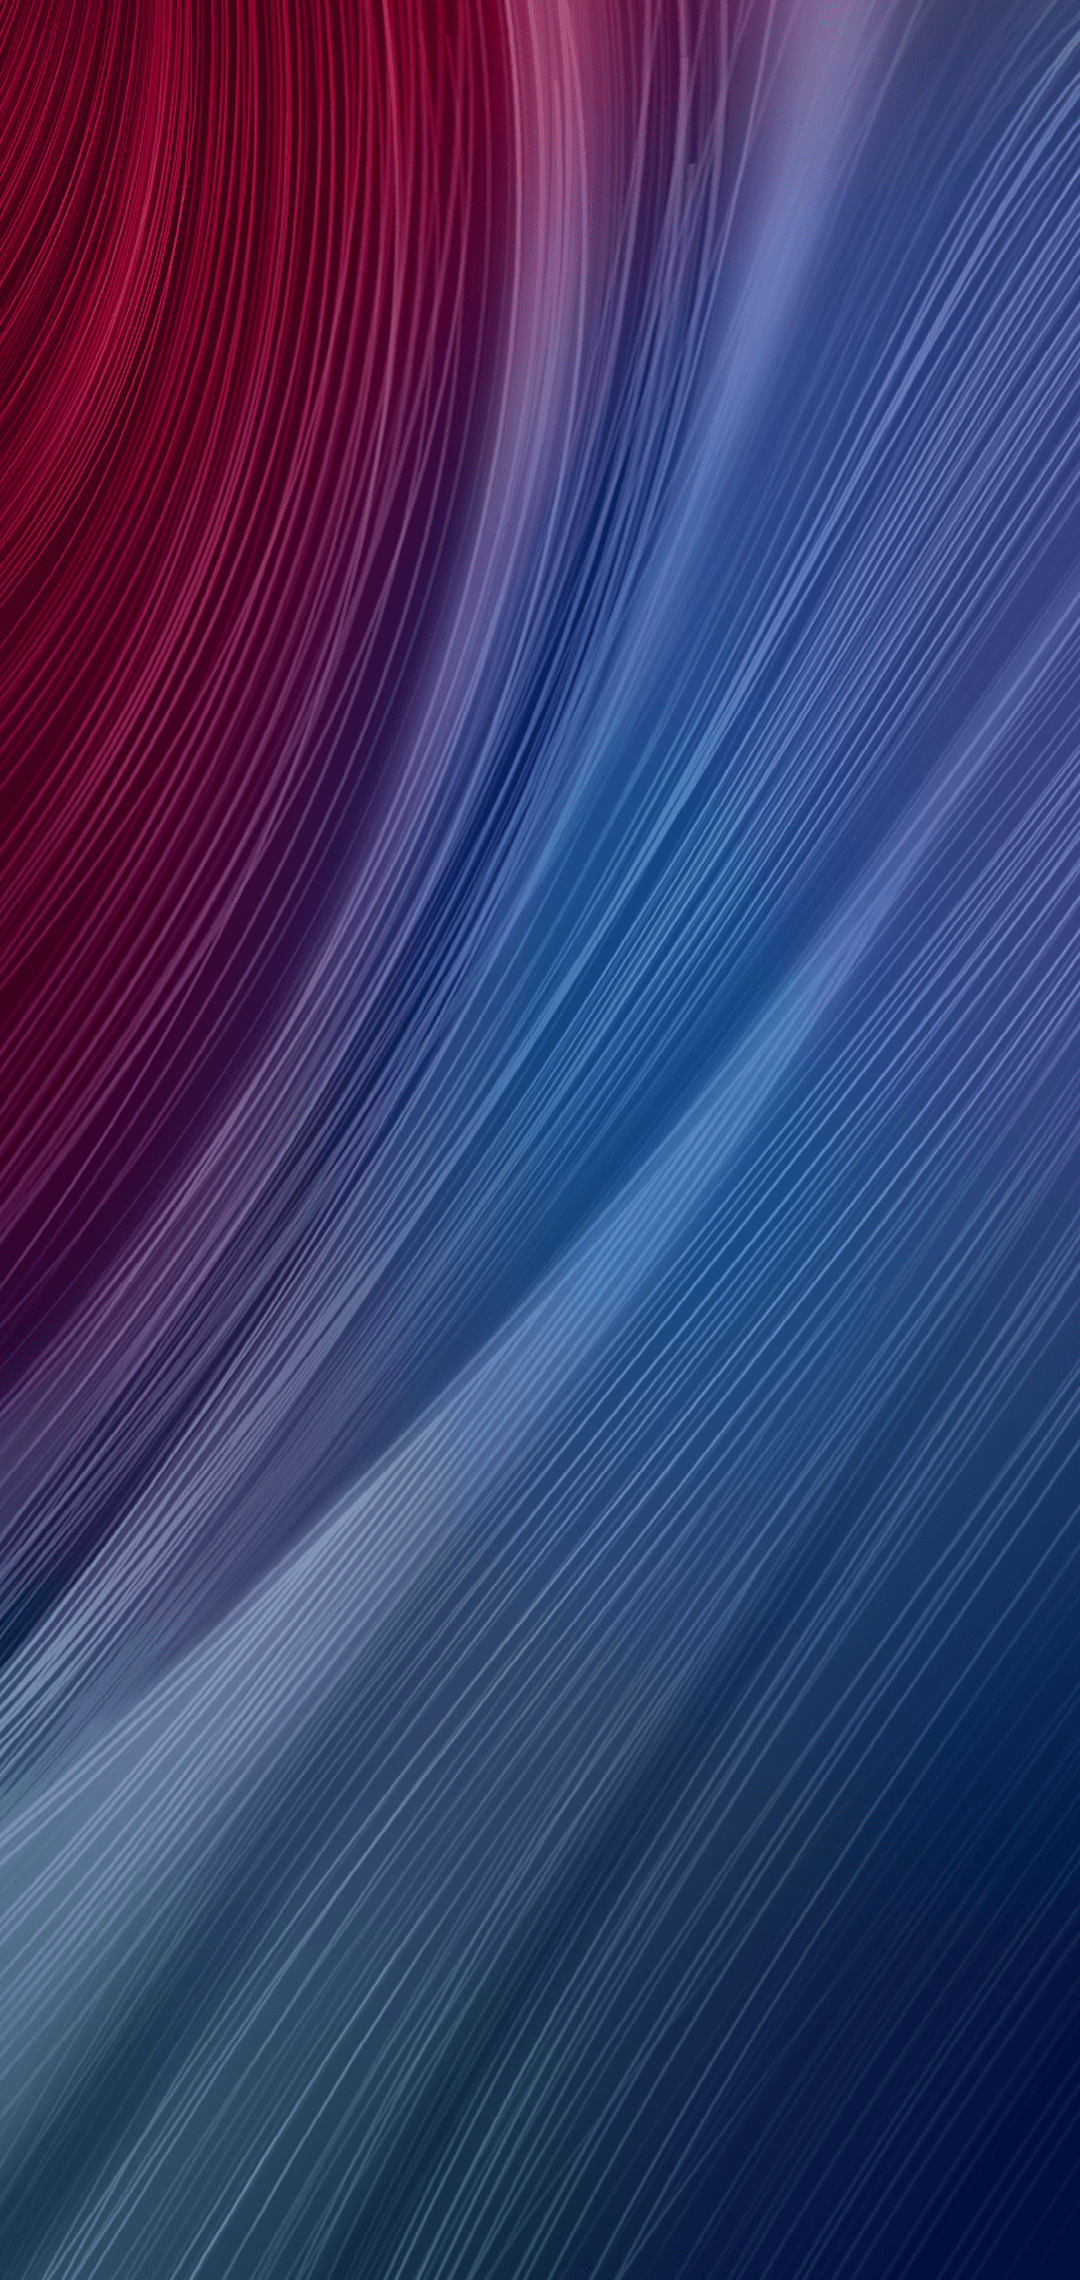 Download Redmi Note 7 Pro Wallpapers